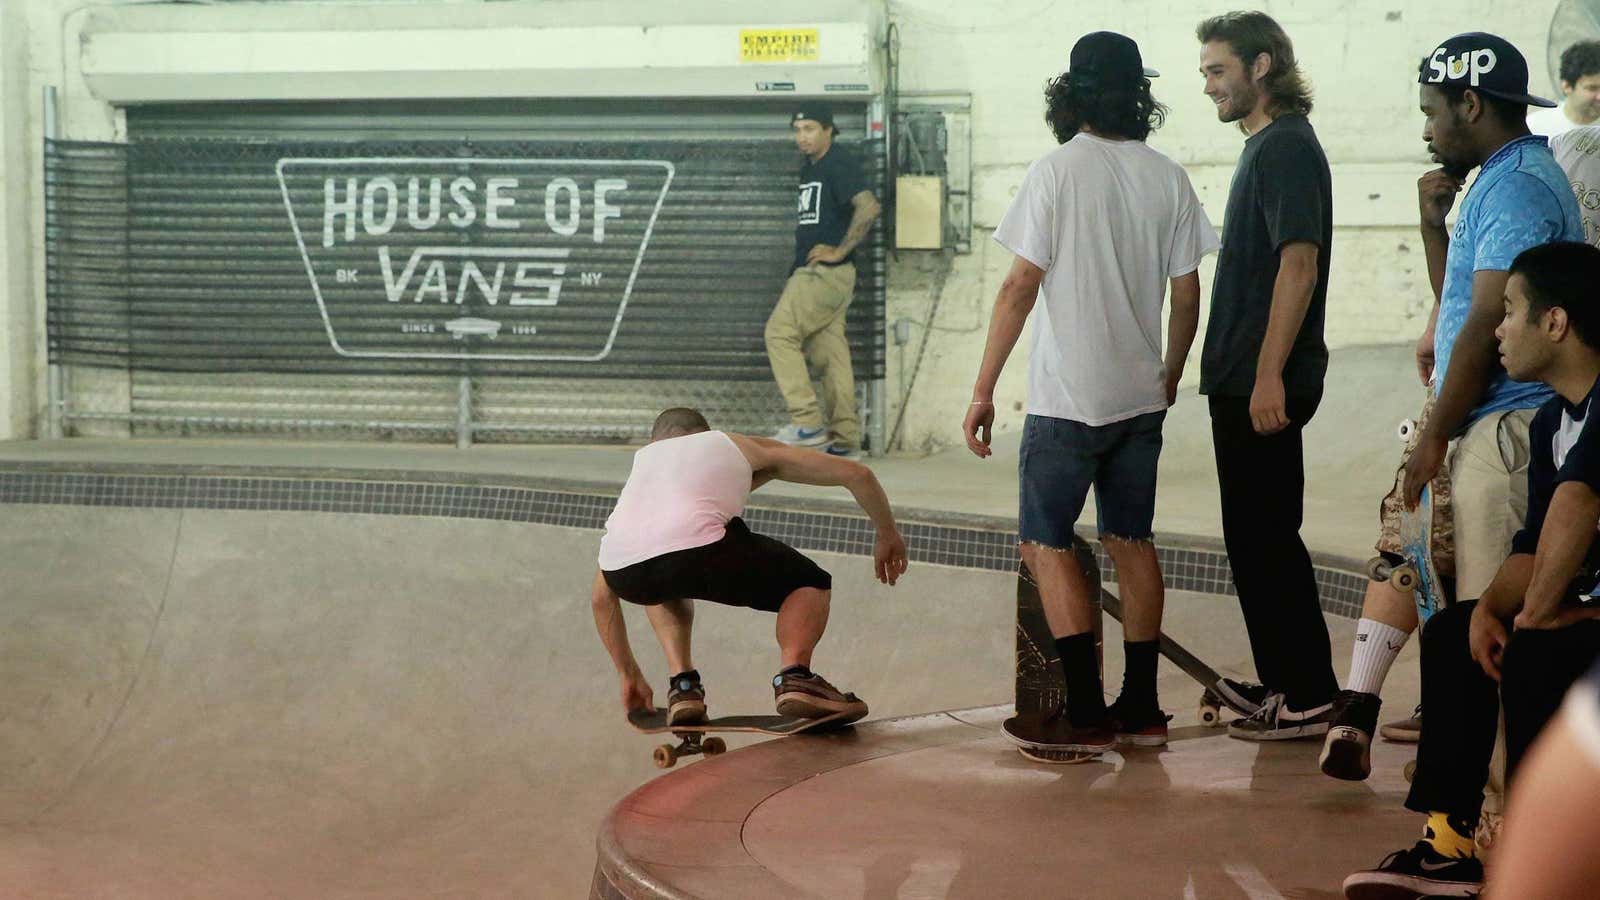 Most of these guys are wearing Nikes, but it was a pretty good quarter for Vans.